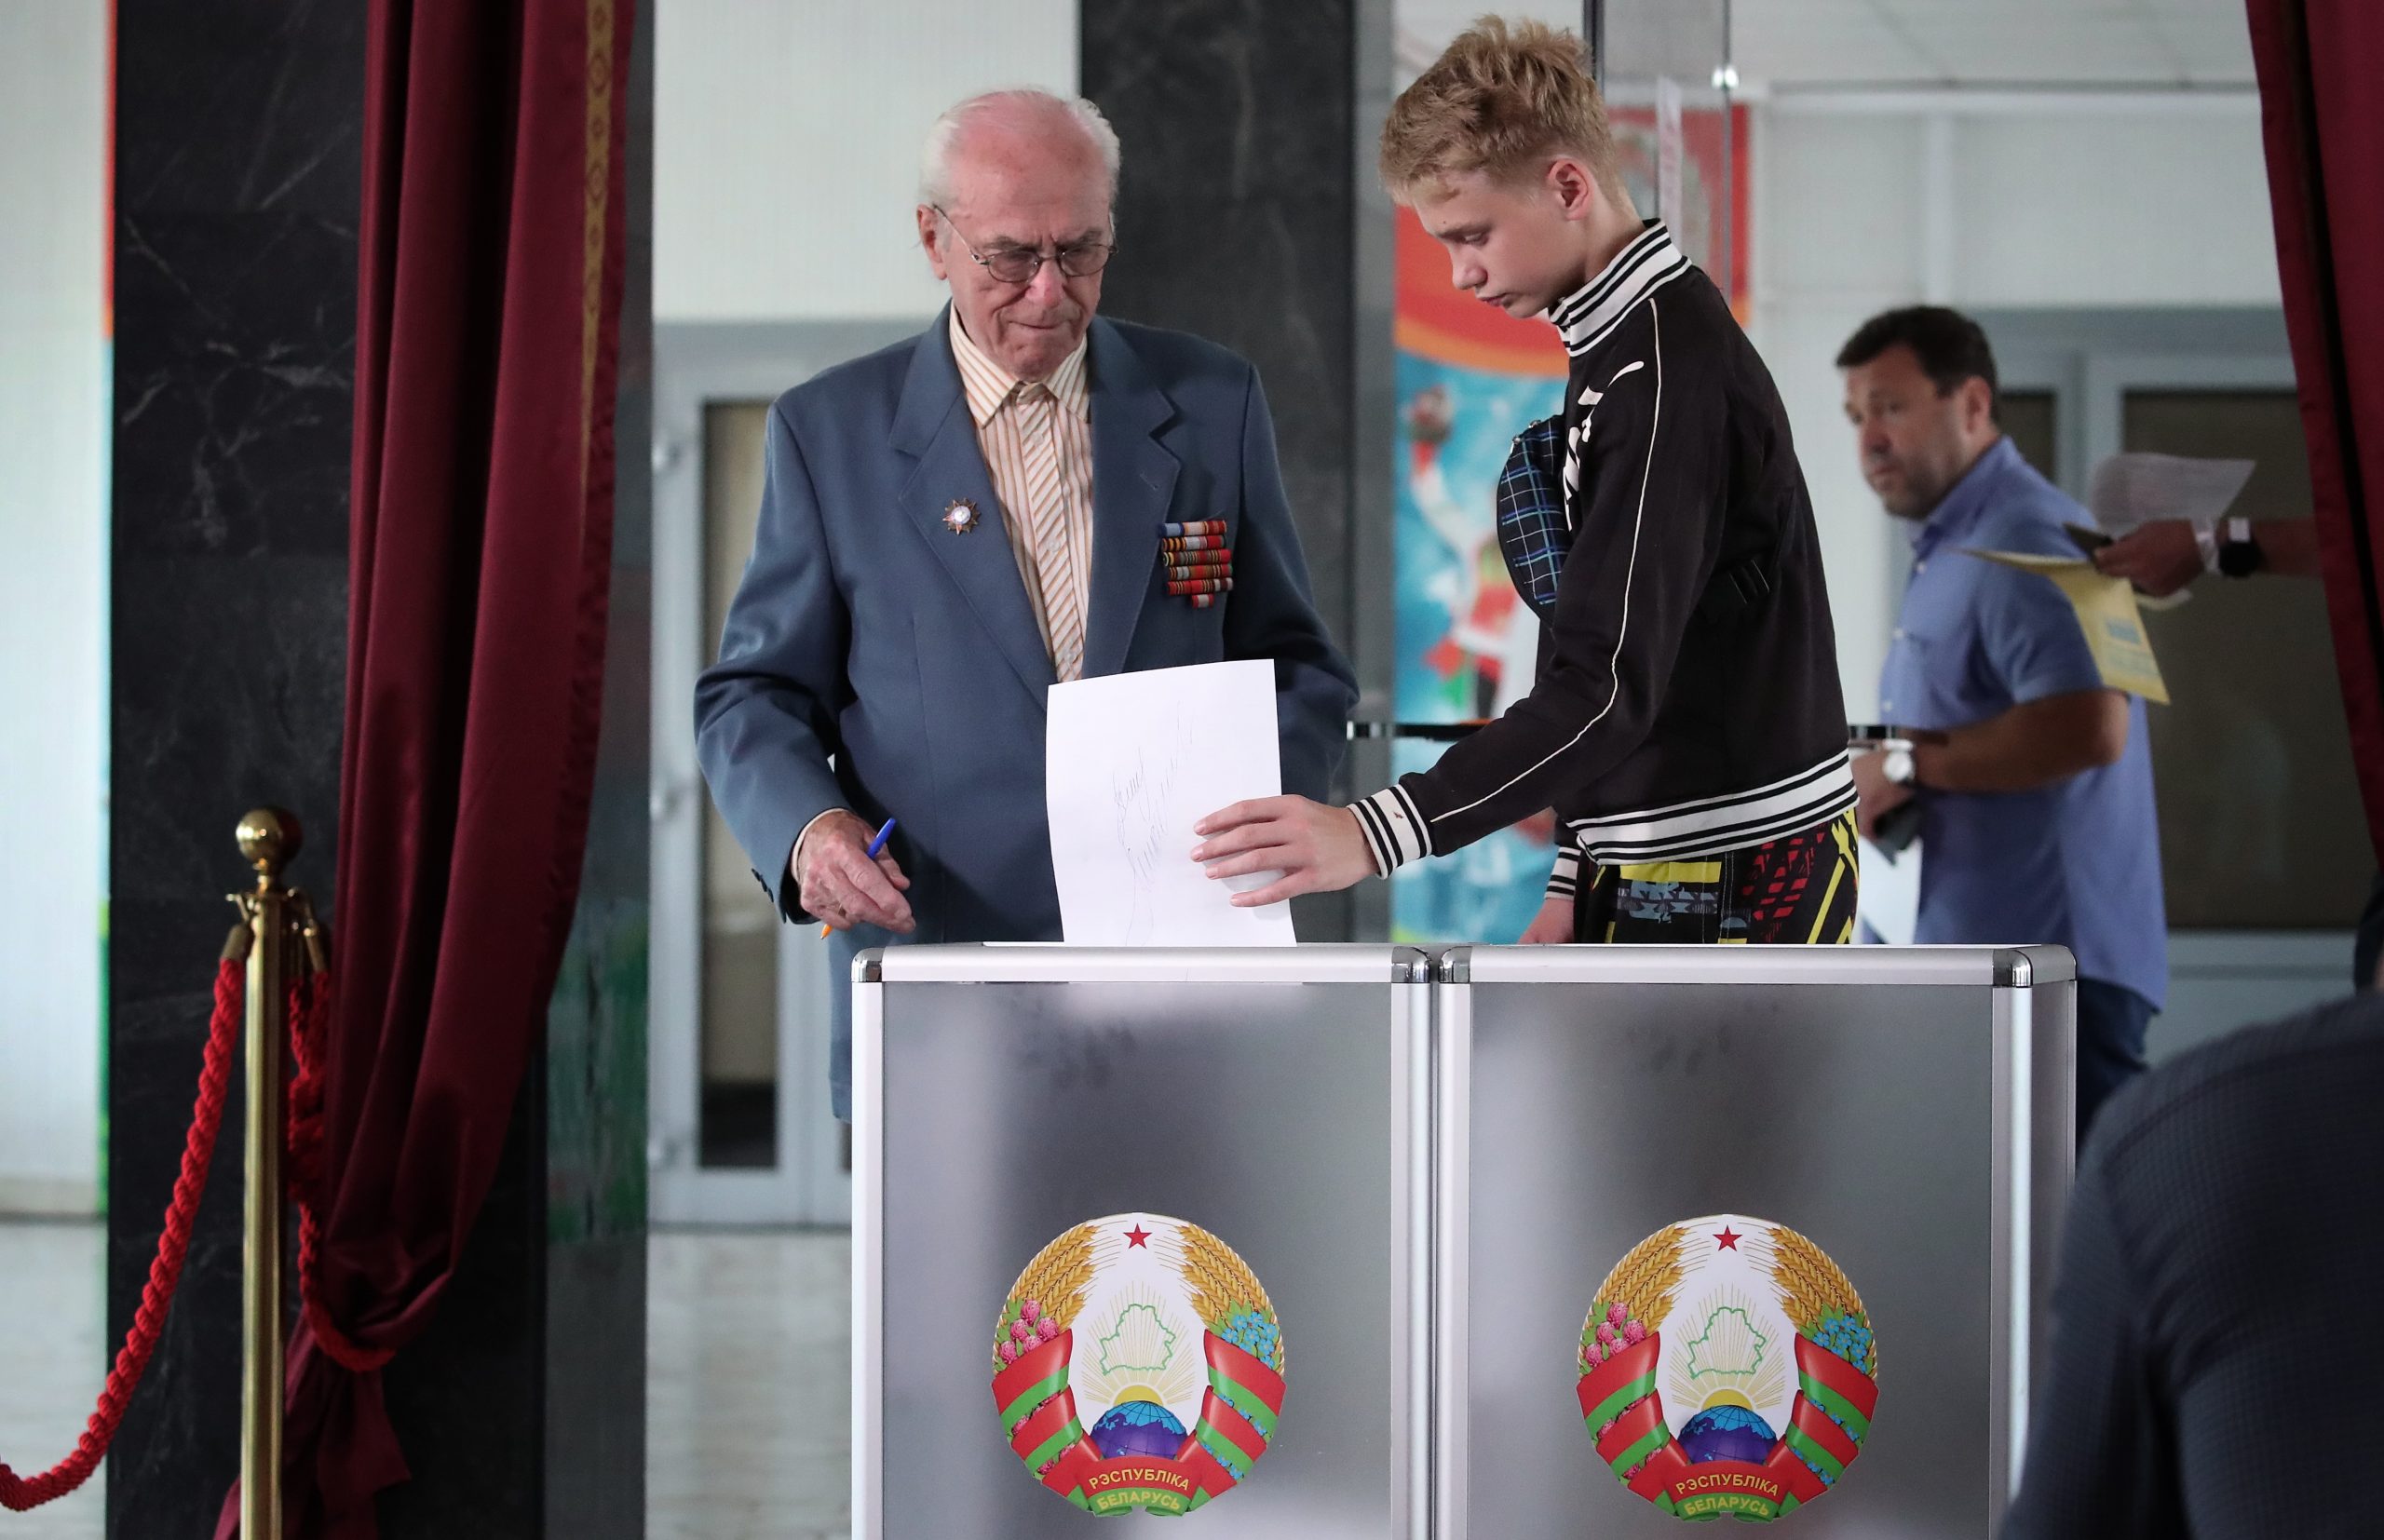 epa08593092 Belarusian people vote during the presidential elections at a polling station in Minsk, Belarus, 09 August 2020. Five candidates are contesting for the presidential seat, including the incumbent president Alexander Lukashenko.  EPA/TATYANA ZENKOVICH